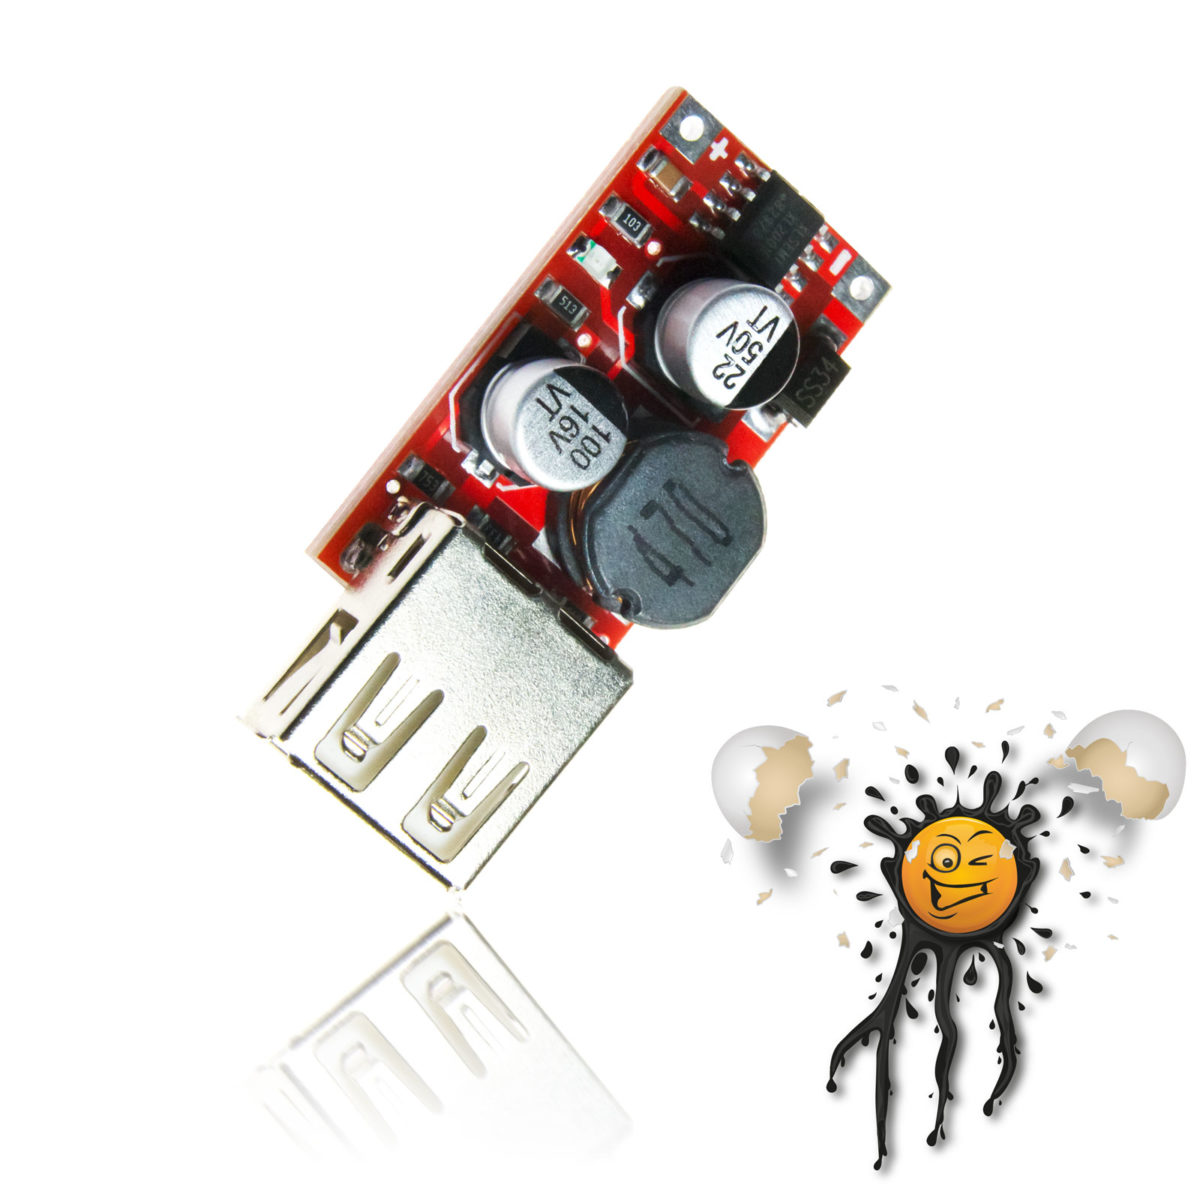 5V USB Spannungswandler single – IoT powered by